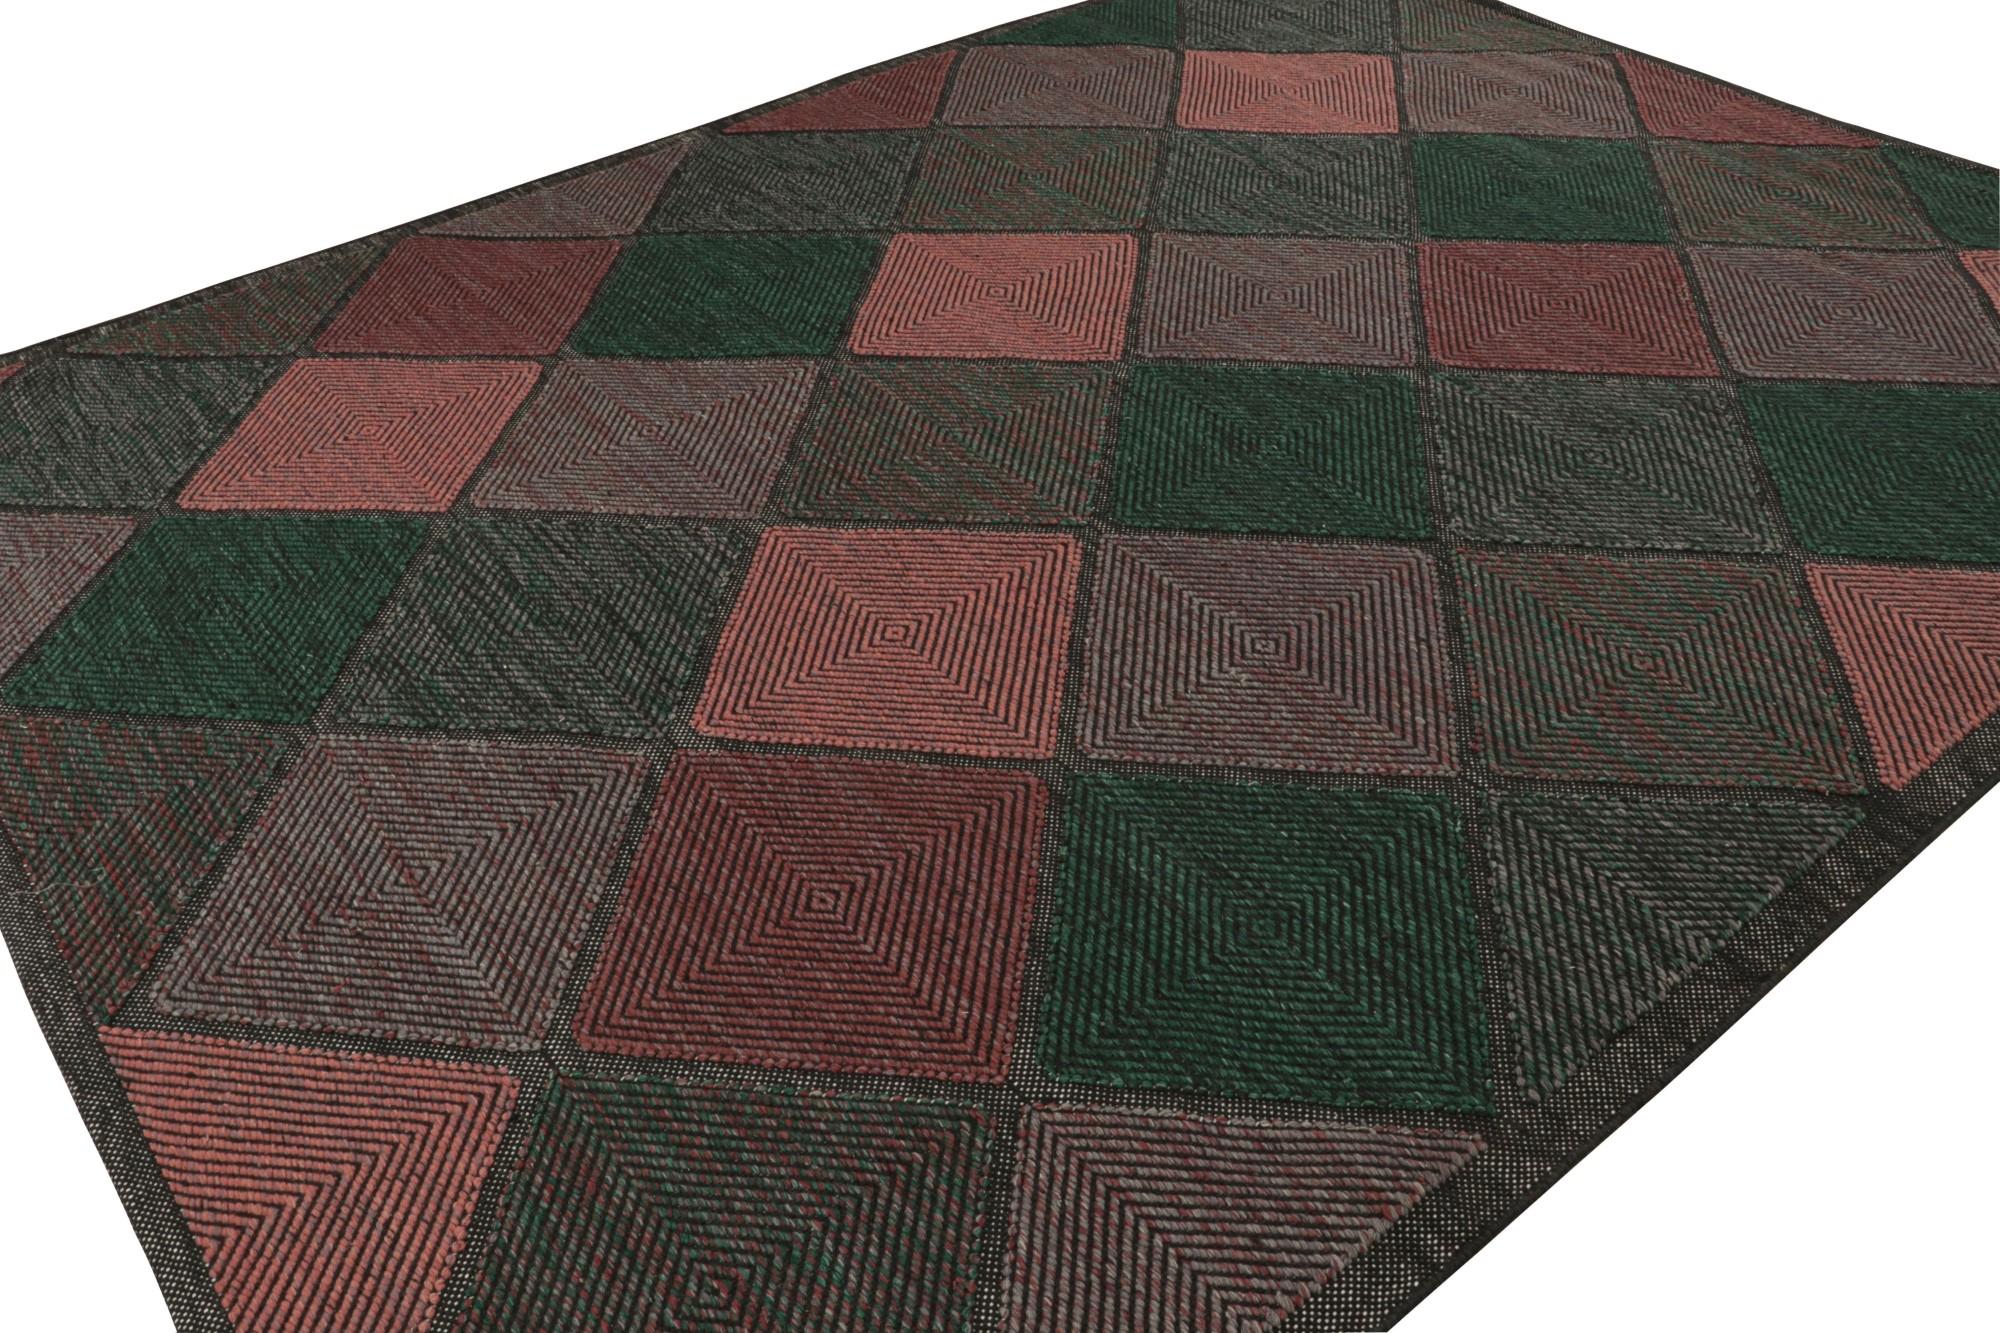 A smart 9x12 Swedish style custom kilim from our award-winning Scandinavian flat weave collection. Handwoven in wool, cotton & undyed natural yarns.

On the Design: 

This rug enjoys geometric patterns in black, red & green. Keen eyes will admire